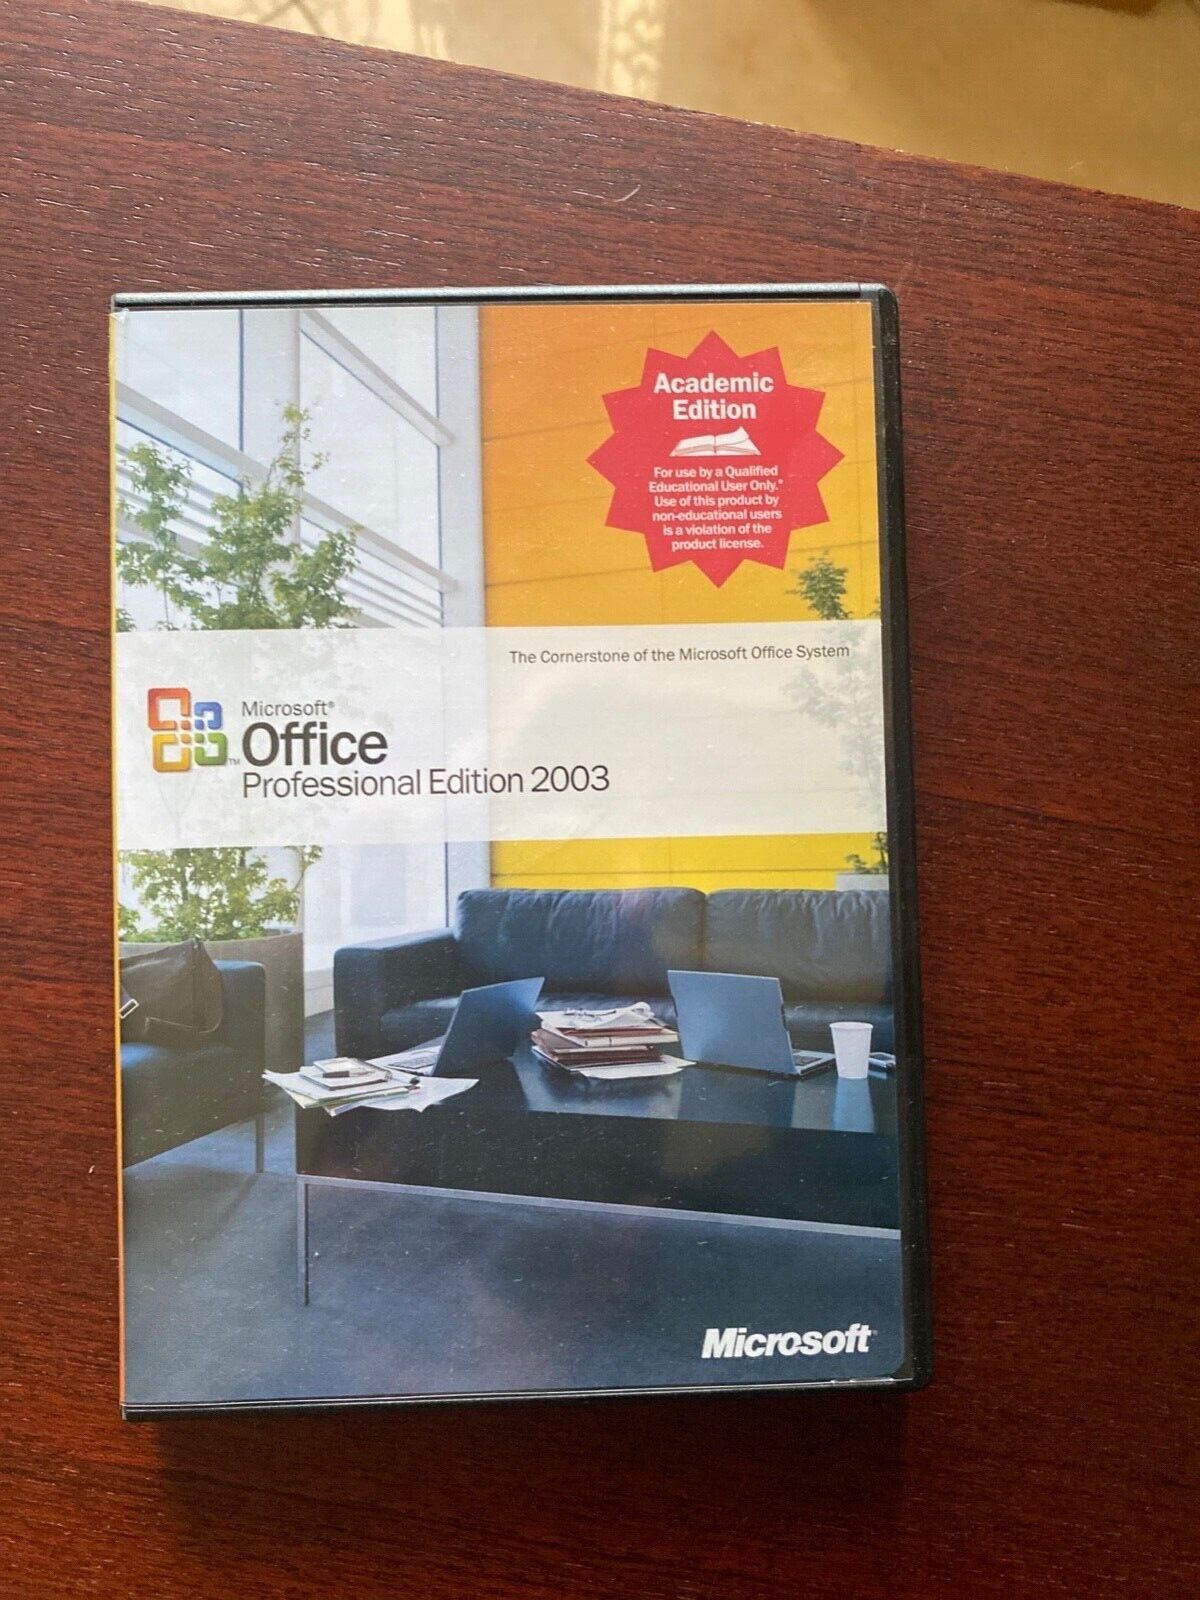 Microsoft Office Professional Edition 2003 / Academic Edition / With Product Key